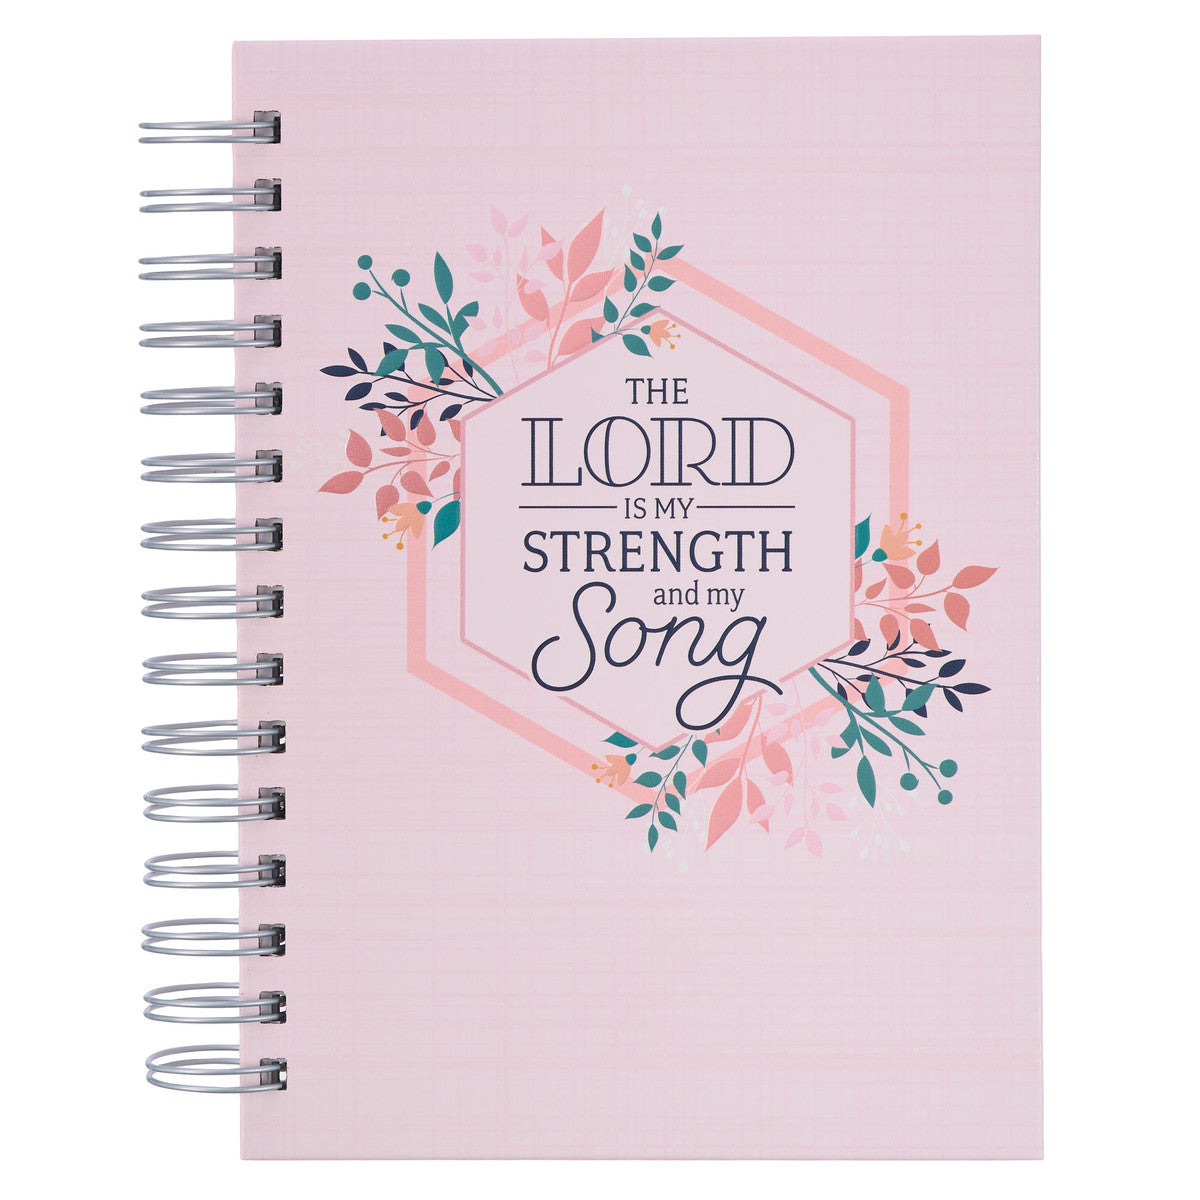 My Strength and My Song Wirebound Journal - Psalm 118:14 - The Christian Gift Company